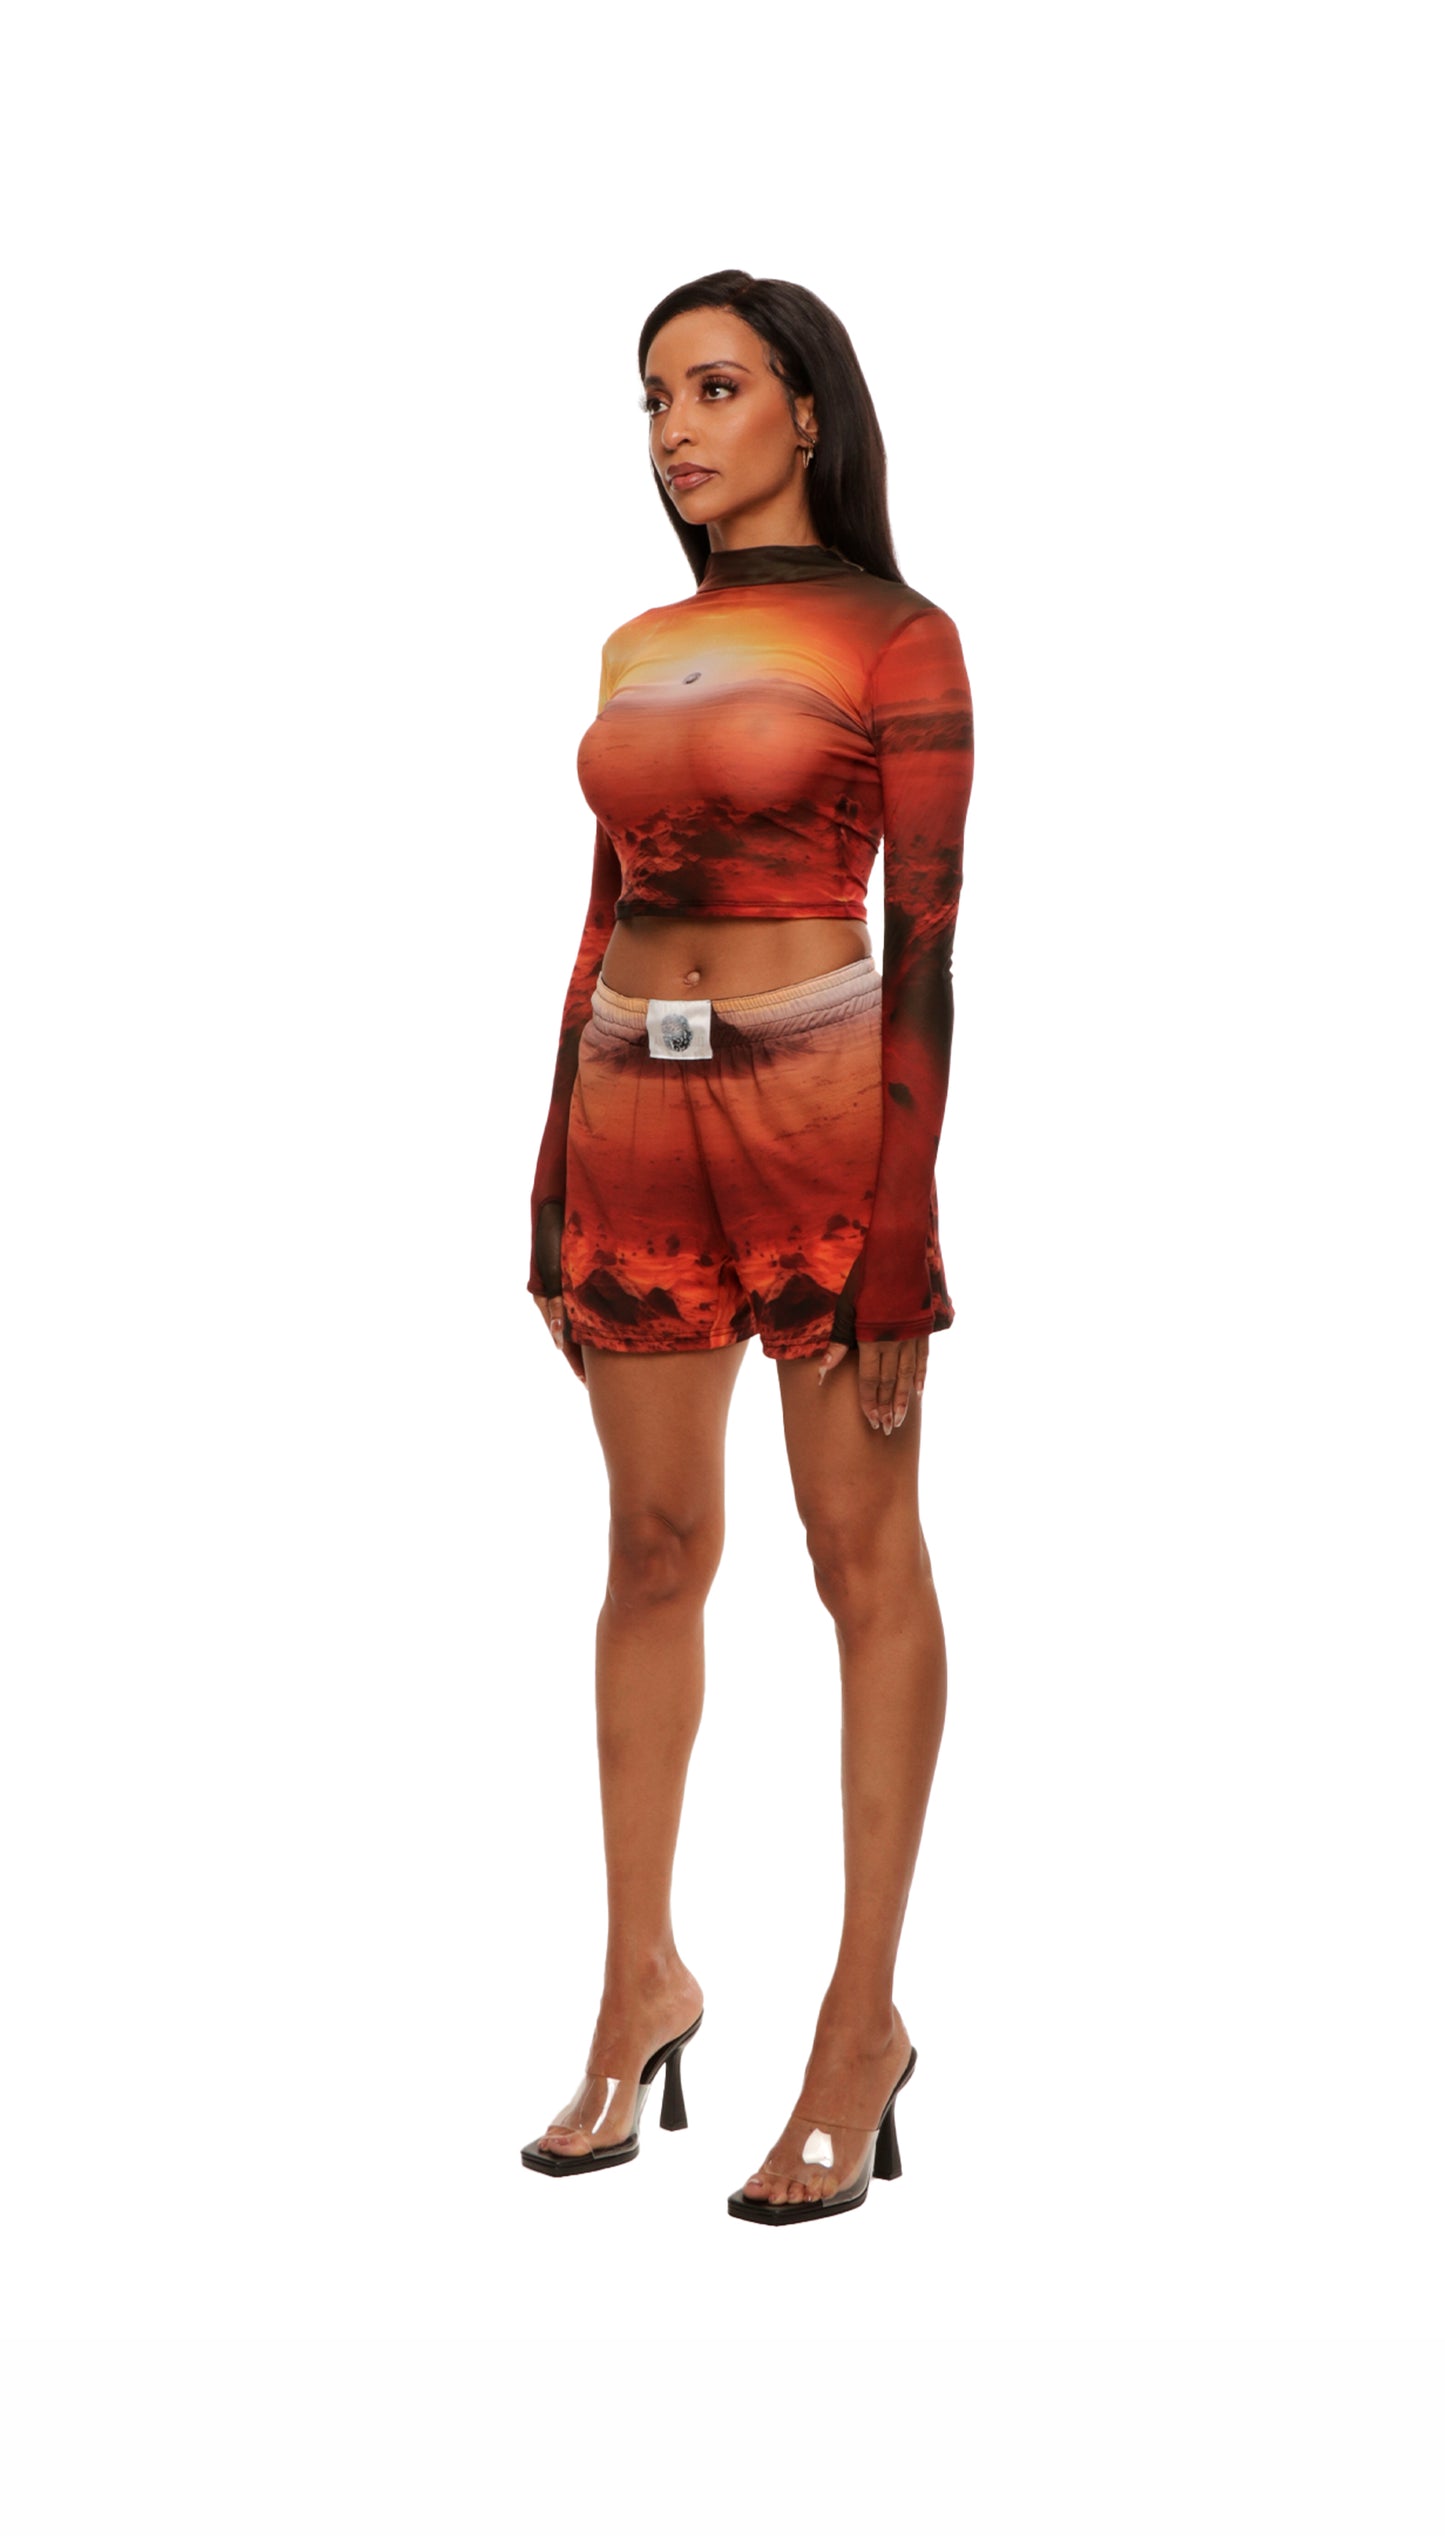 Side view of woman who looks like Beyoncé or Aaliyah wears cosmic Mars sunset printed mesh short basketball shorts with QR logo detail